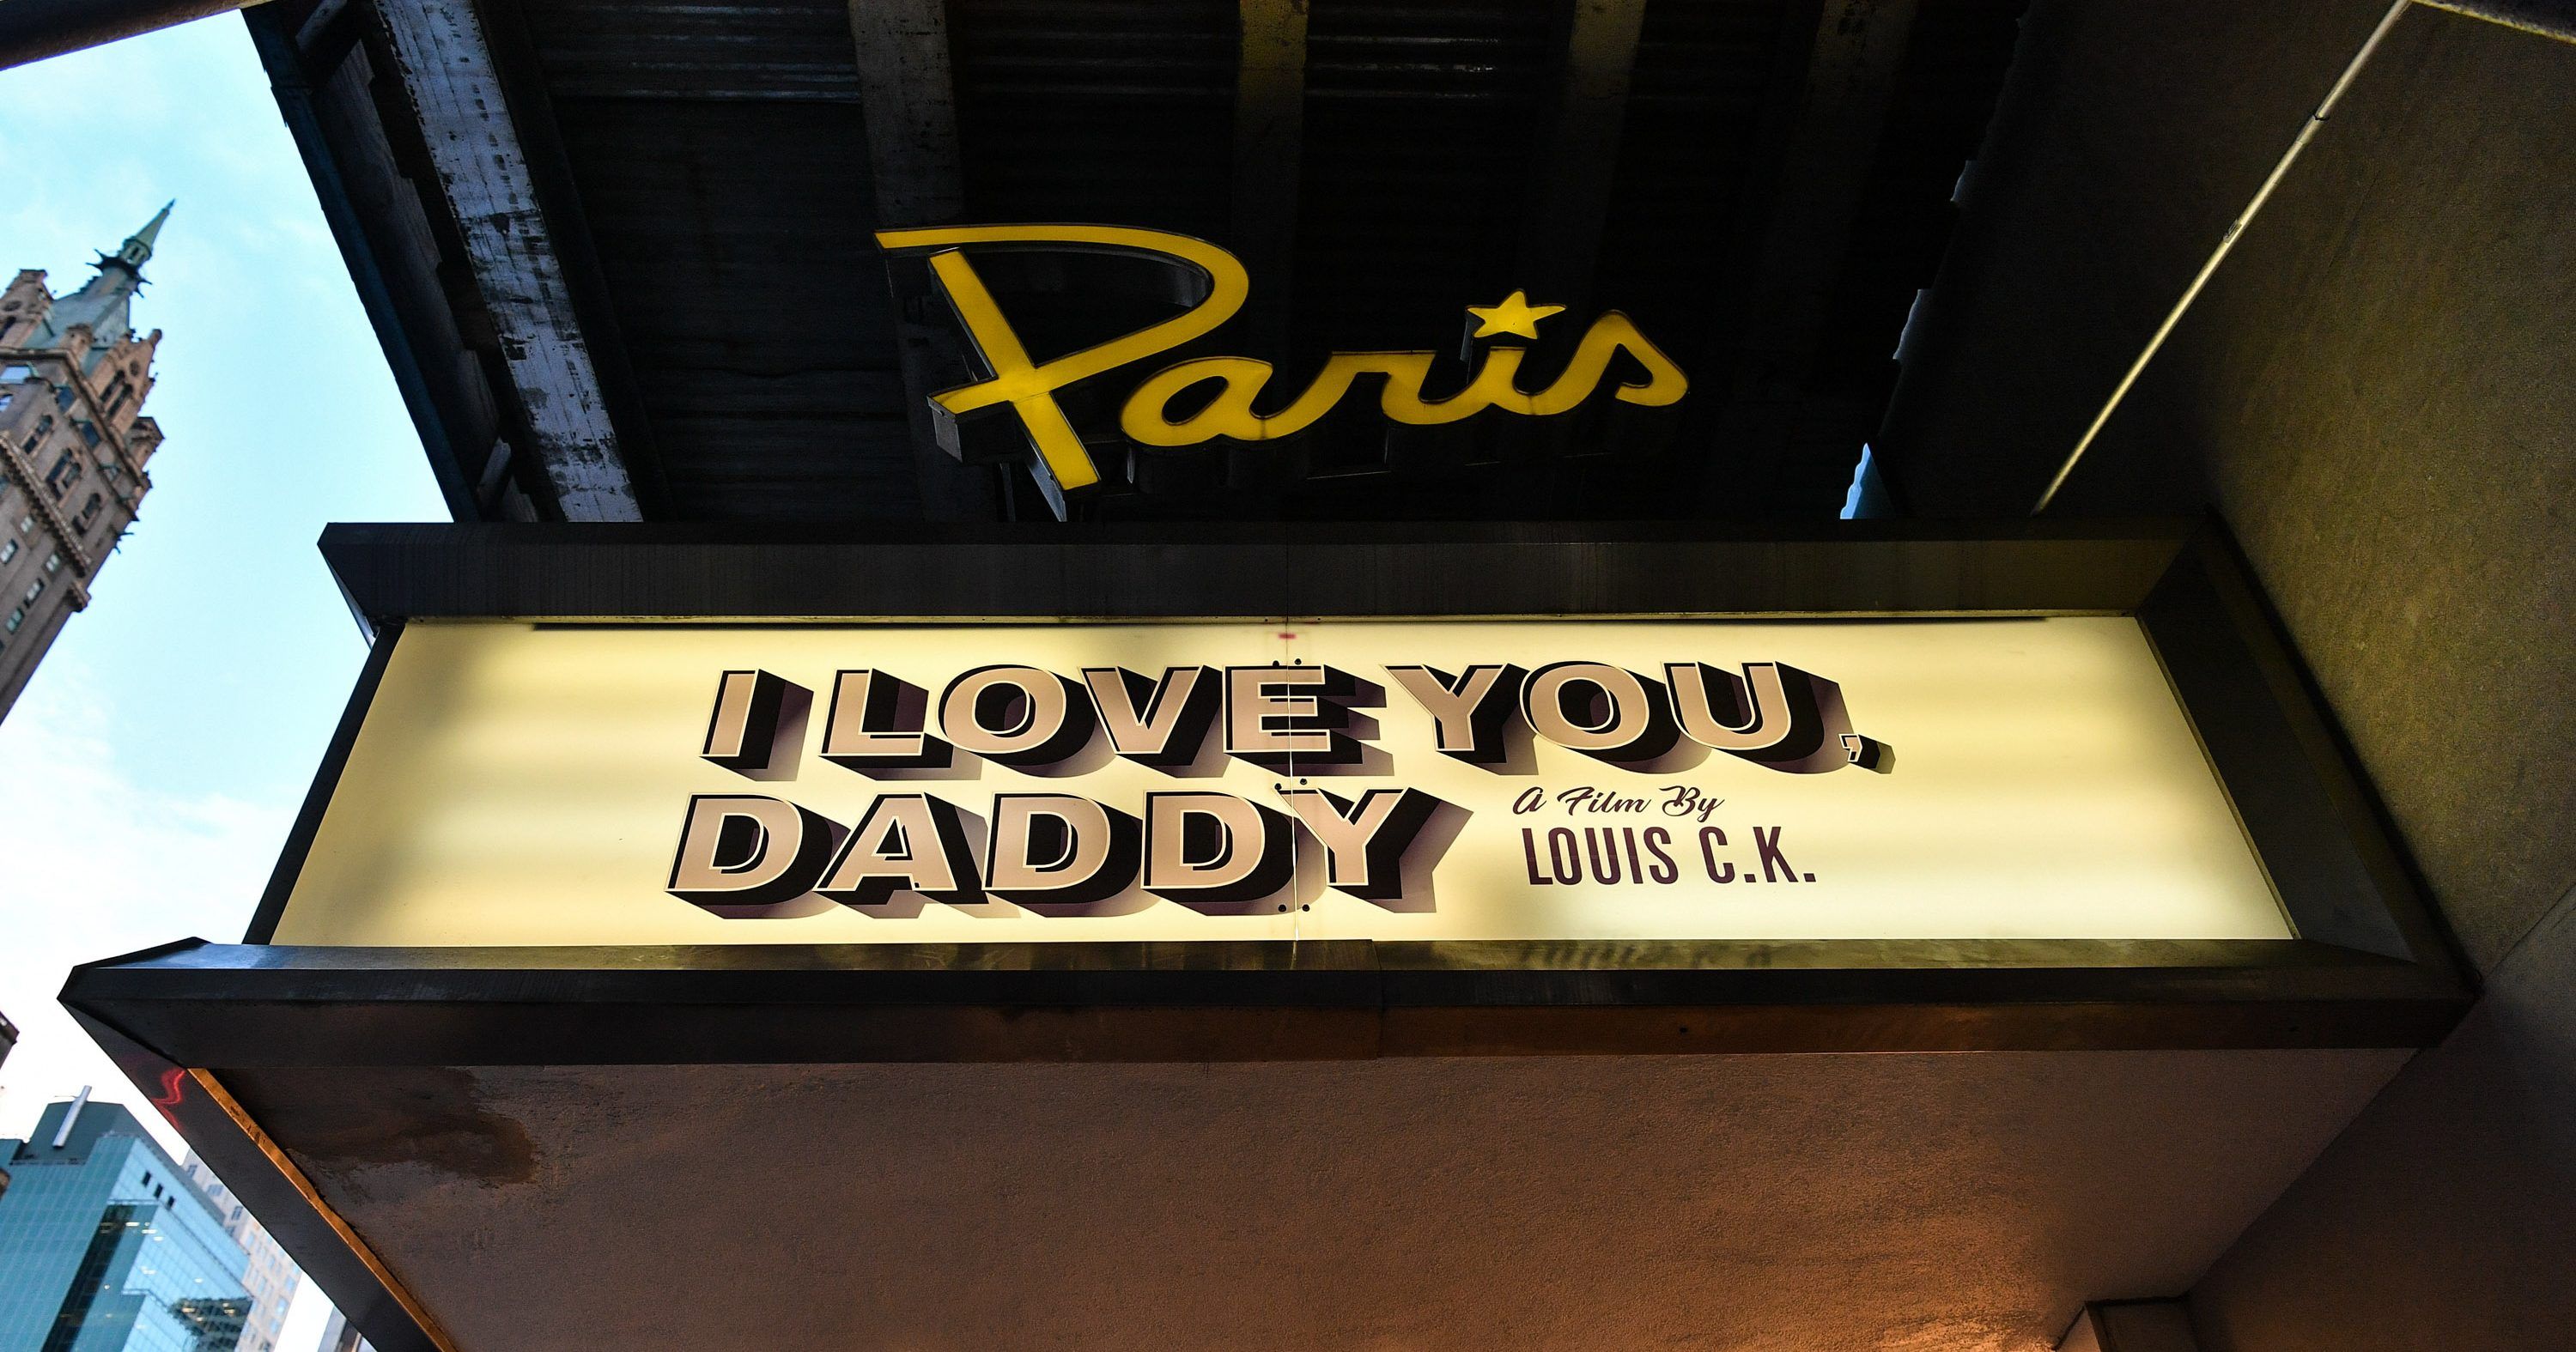 NEW YORK, NY - NOVEMBER 09: An exterior view of The Paris Theatre with a marquee advertising the Louis C.K. movie 